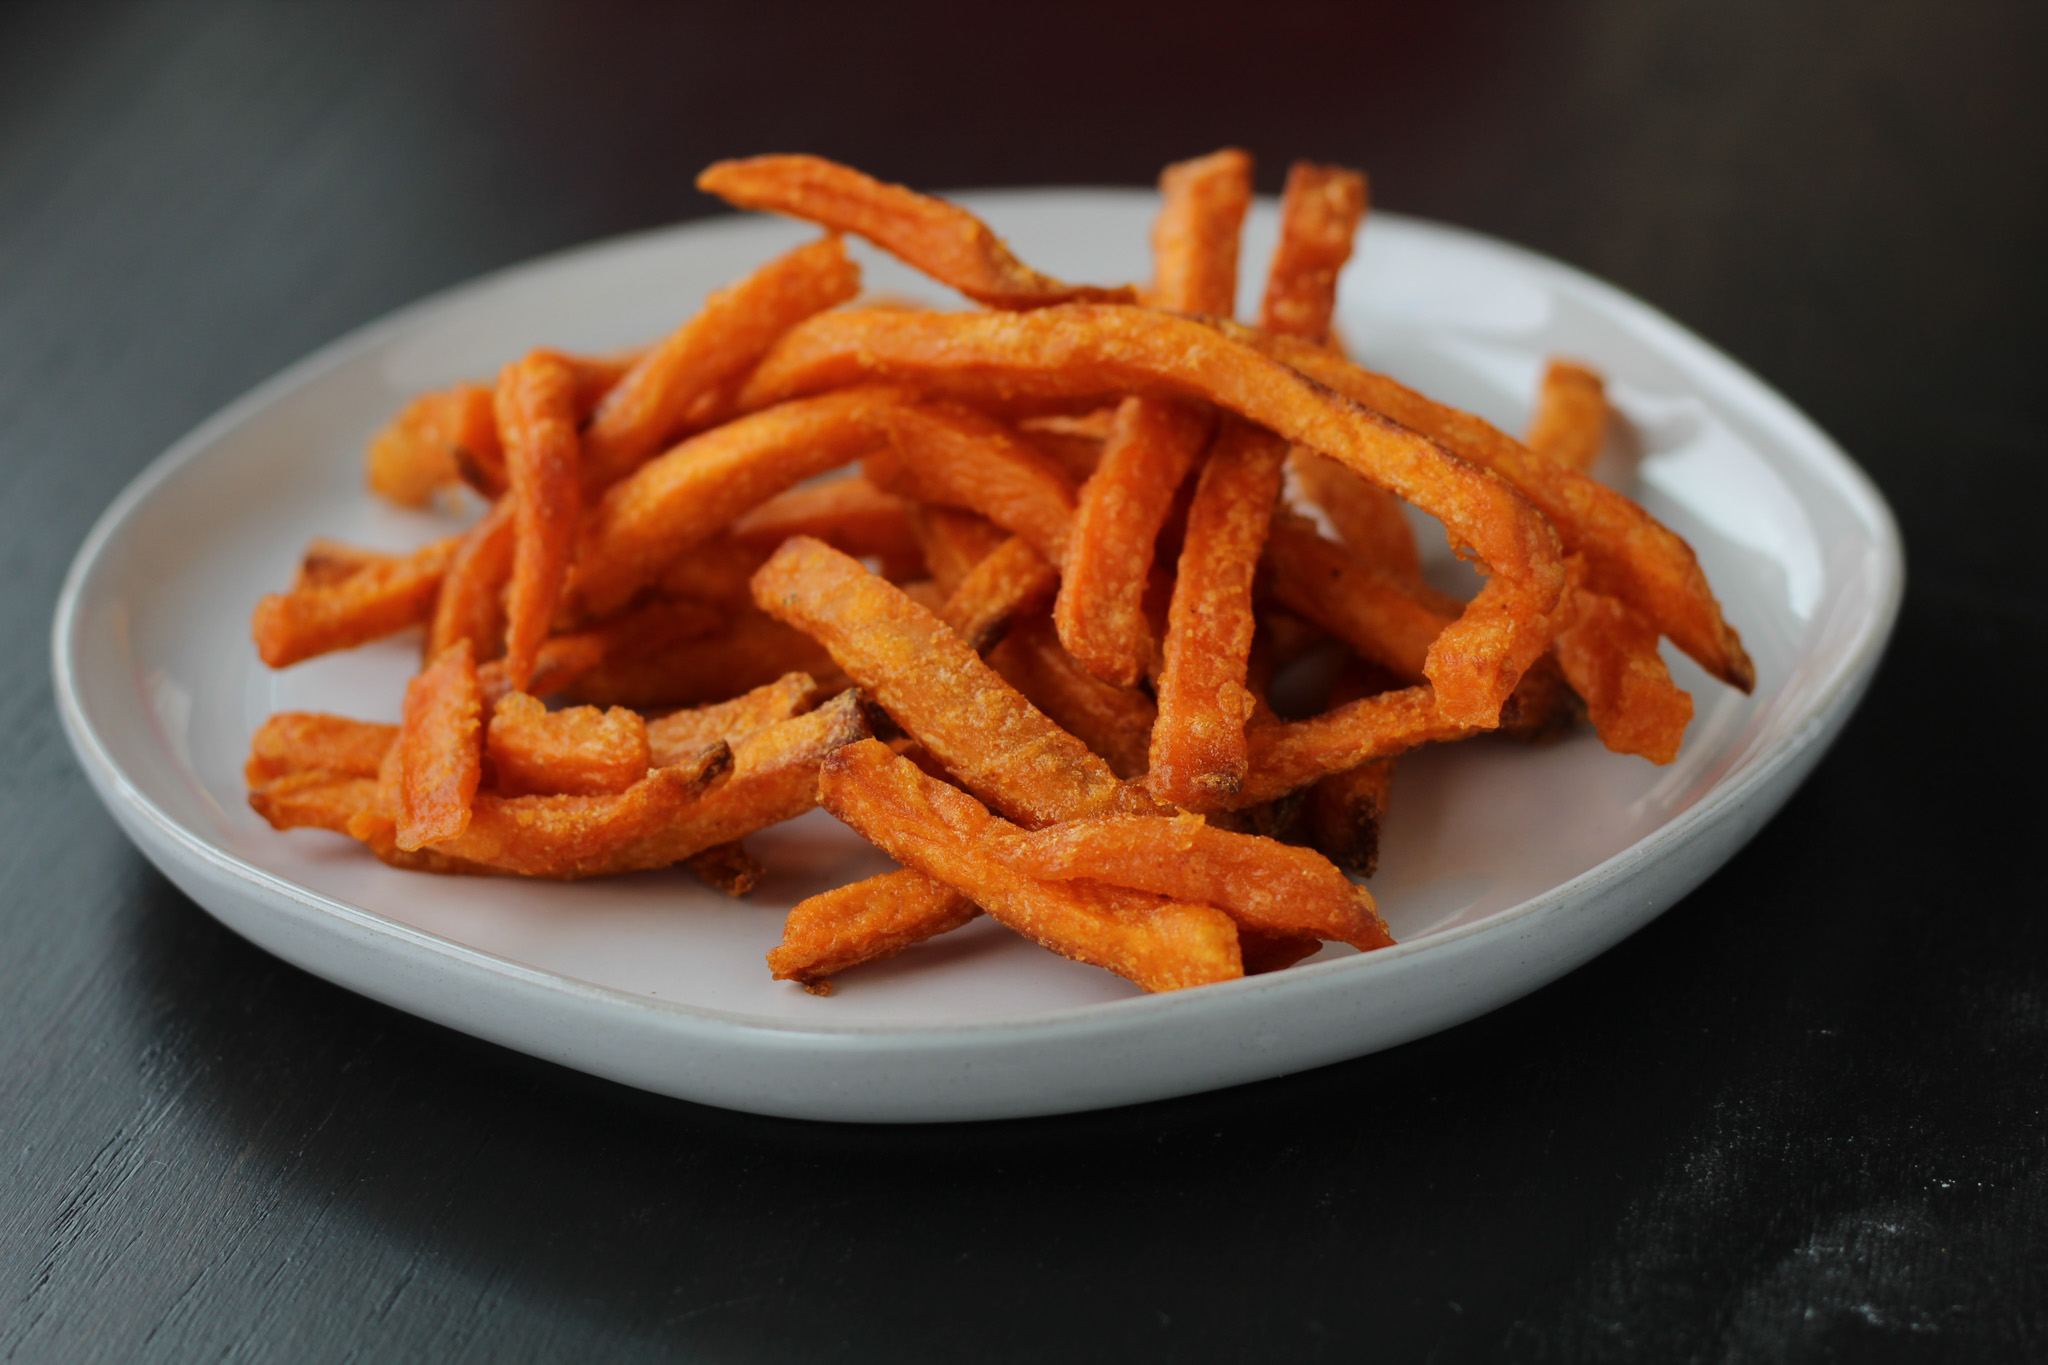 Frozen sweet potato fries on a plate after being cooked in an air fryer